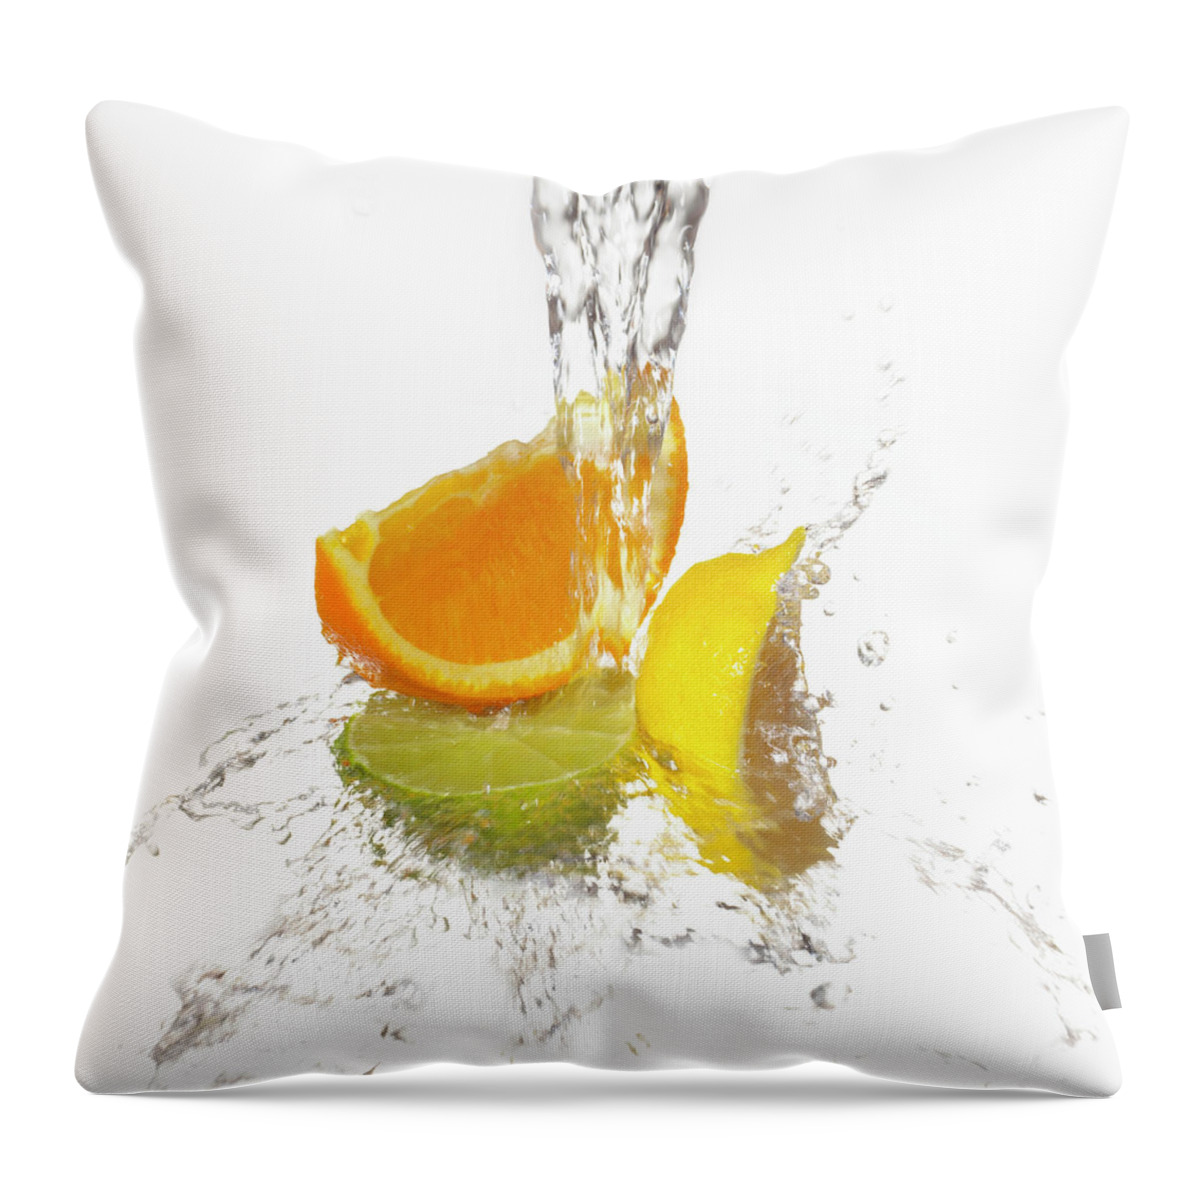 White Background Throw Pillow featuring the photograph Water Splashing On Citrus Slices by Annabelle Breakey